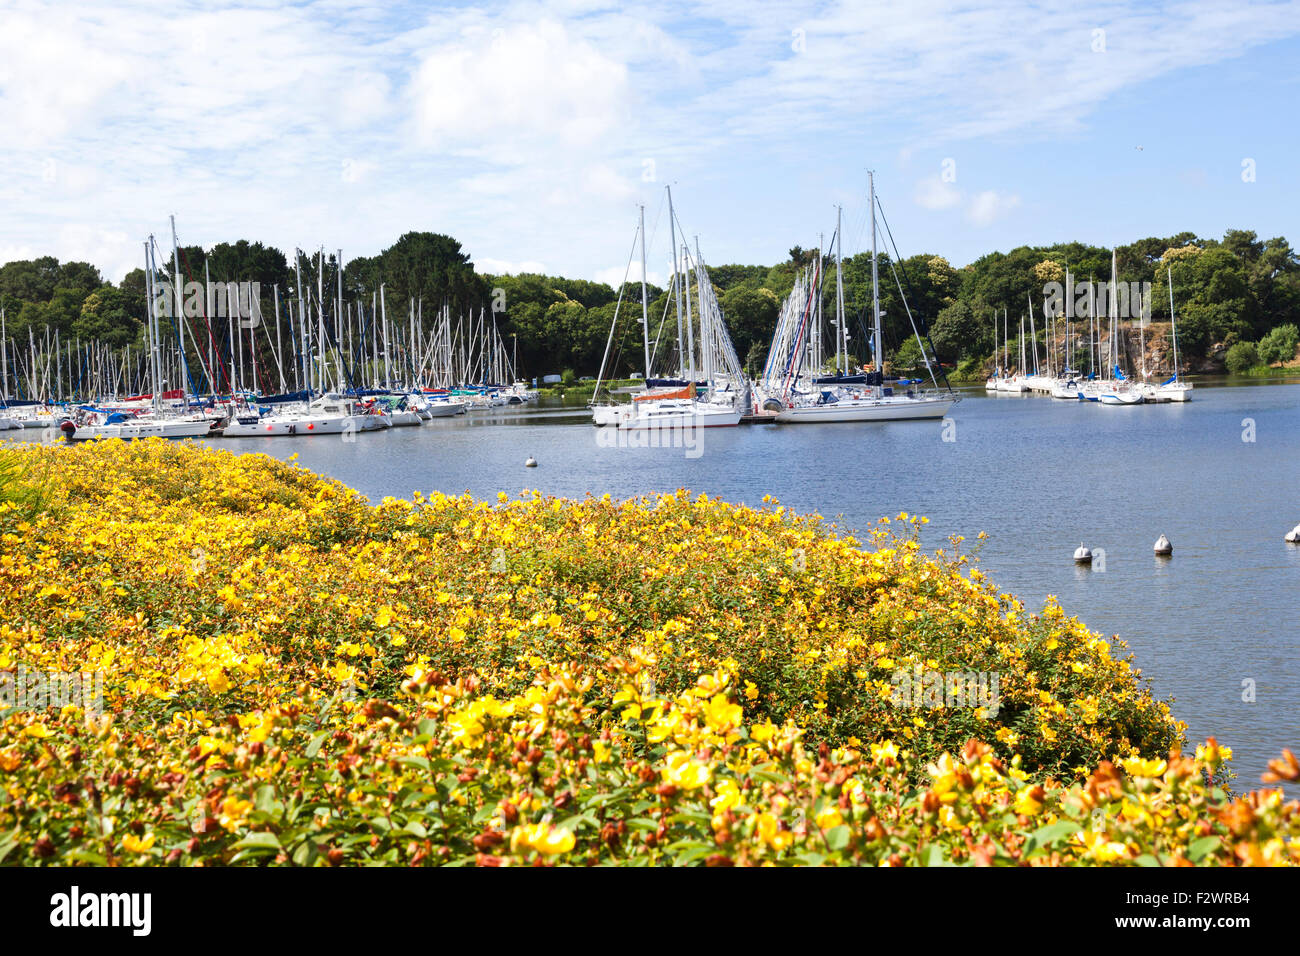 Yachts moored on the River Vilaine at Arzal, Brittany, France Stock Photo